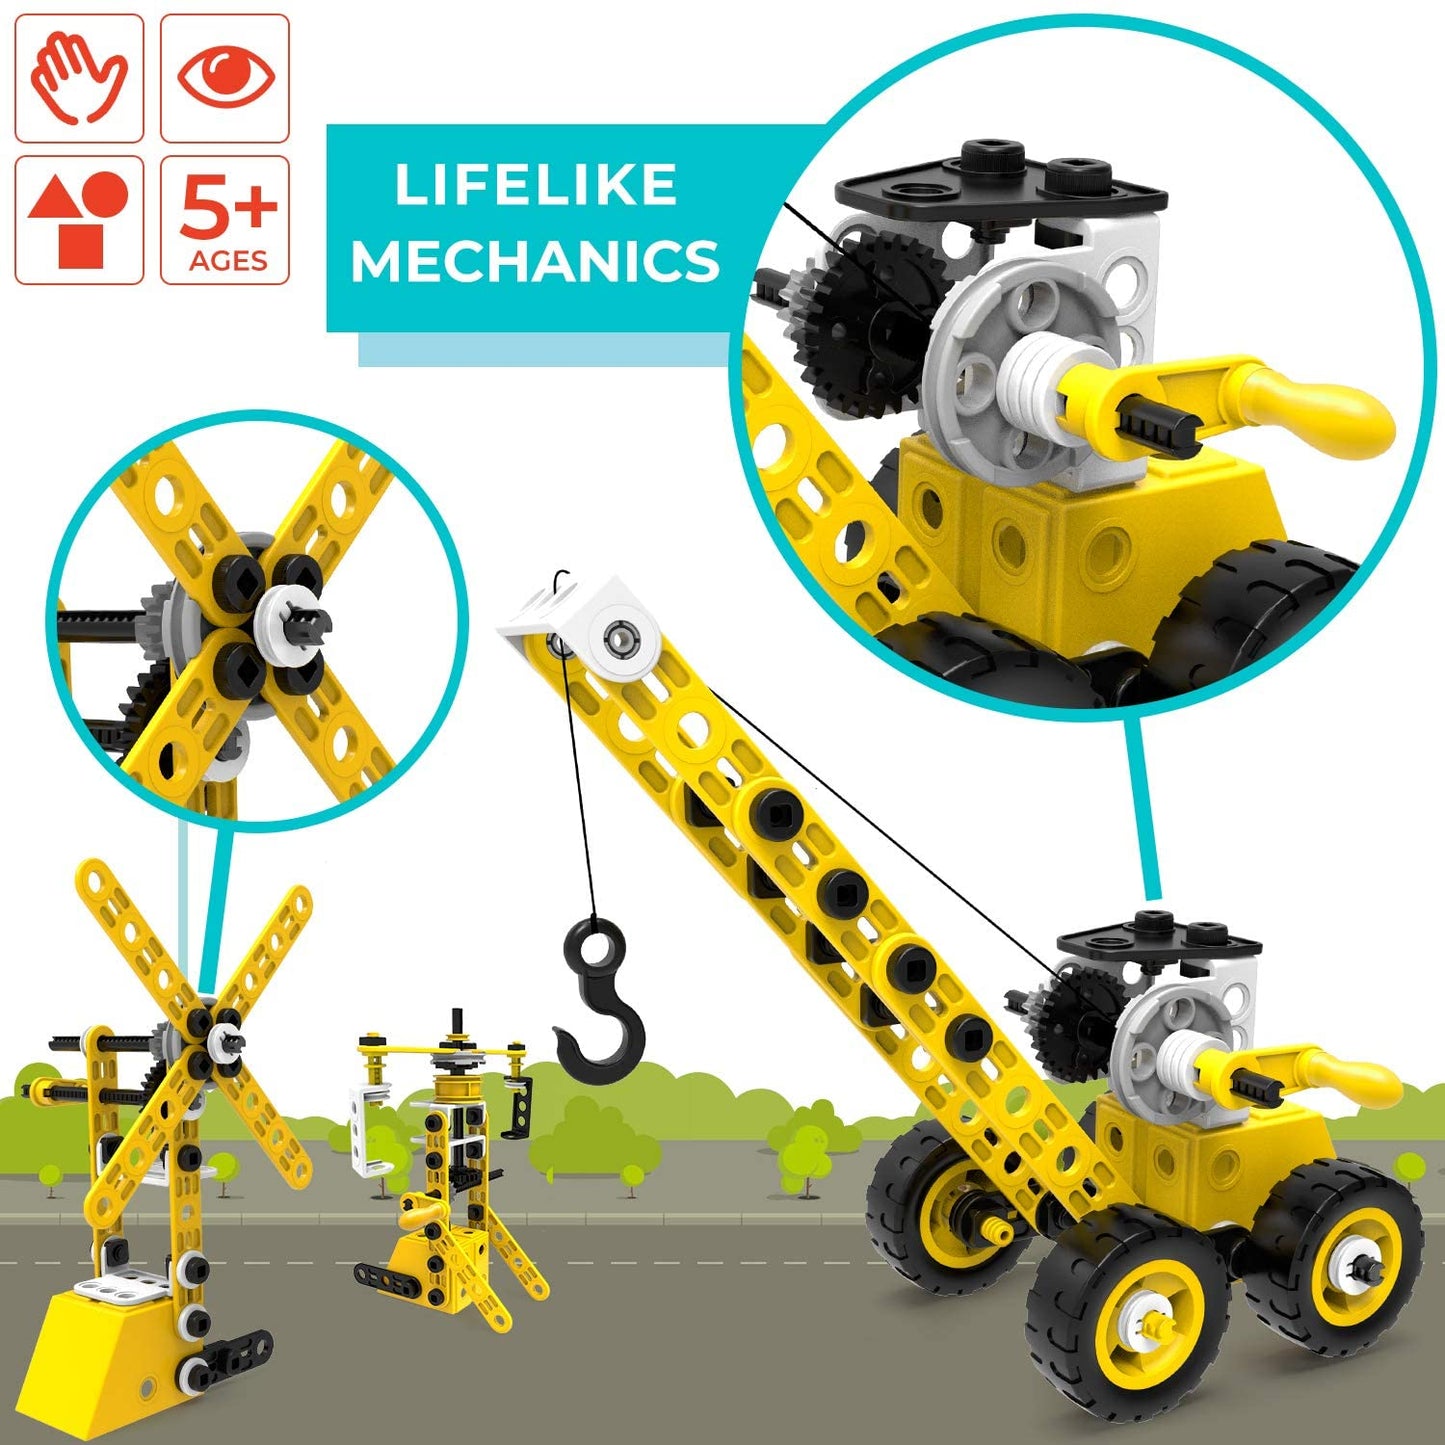 100 Piece 8-in-1 DIY Learning Construction Toy | STEM Toys for Boys and Girls